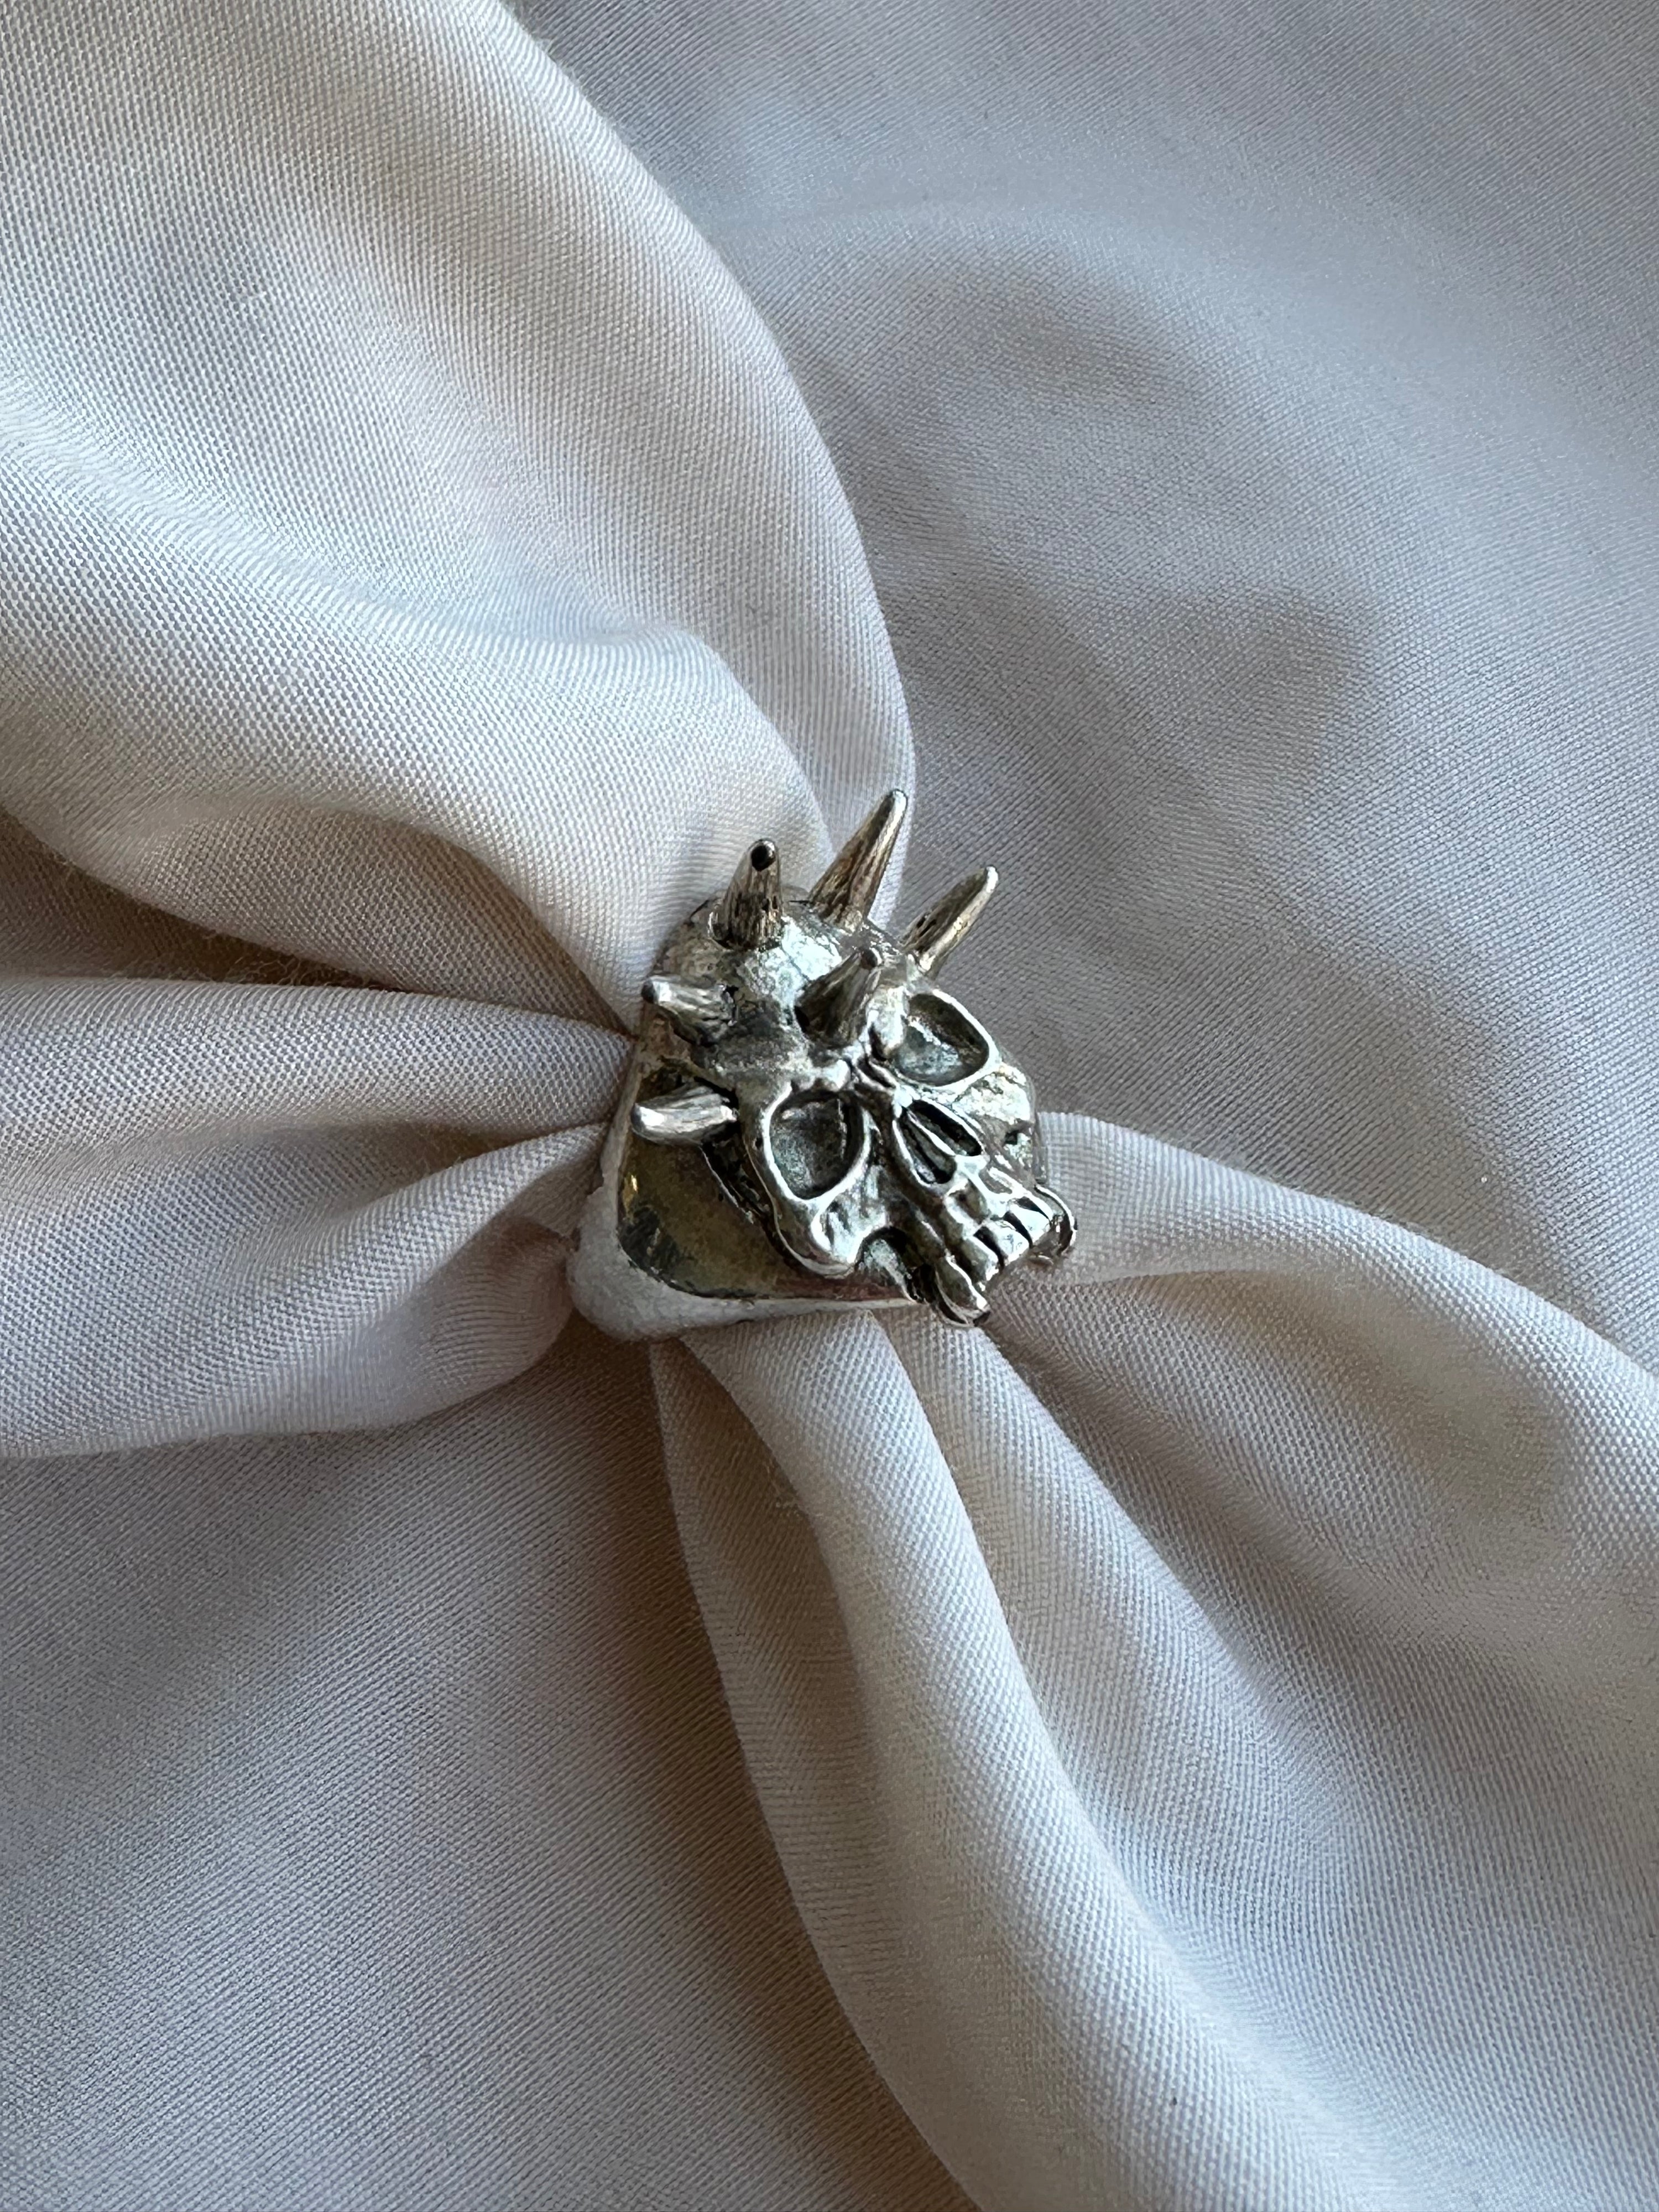 1994 G&S Spiked Skull Ring Size 7